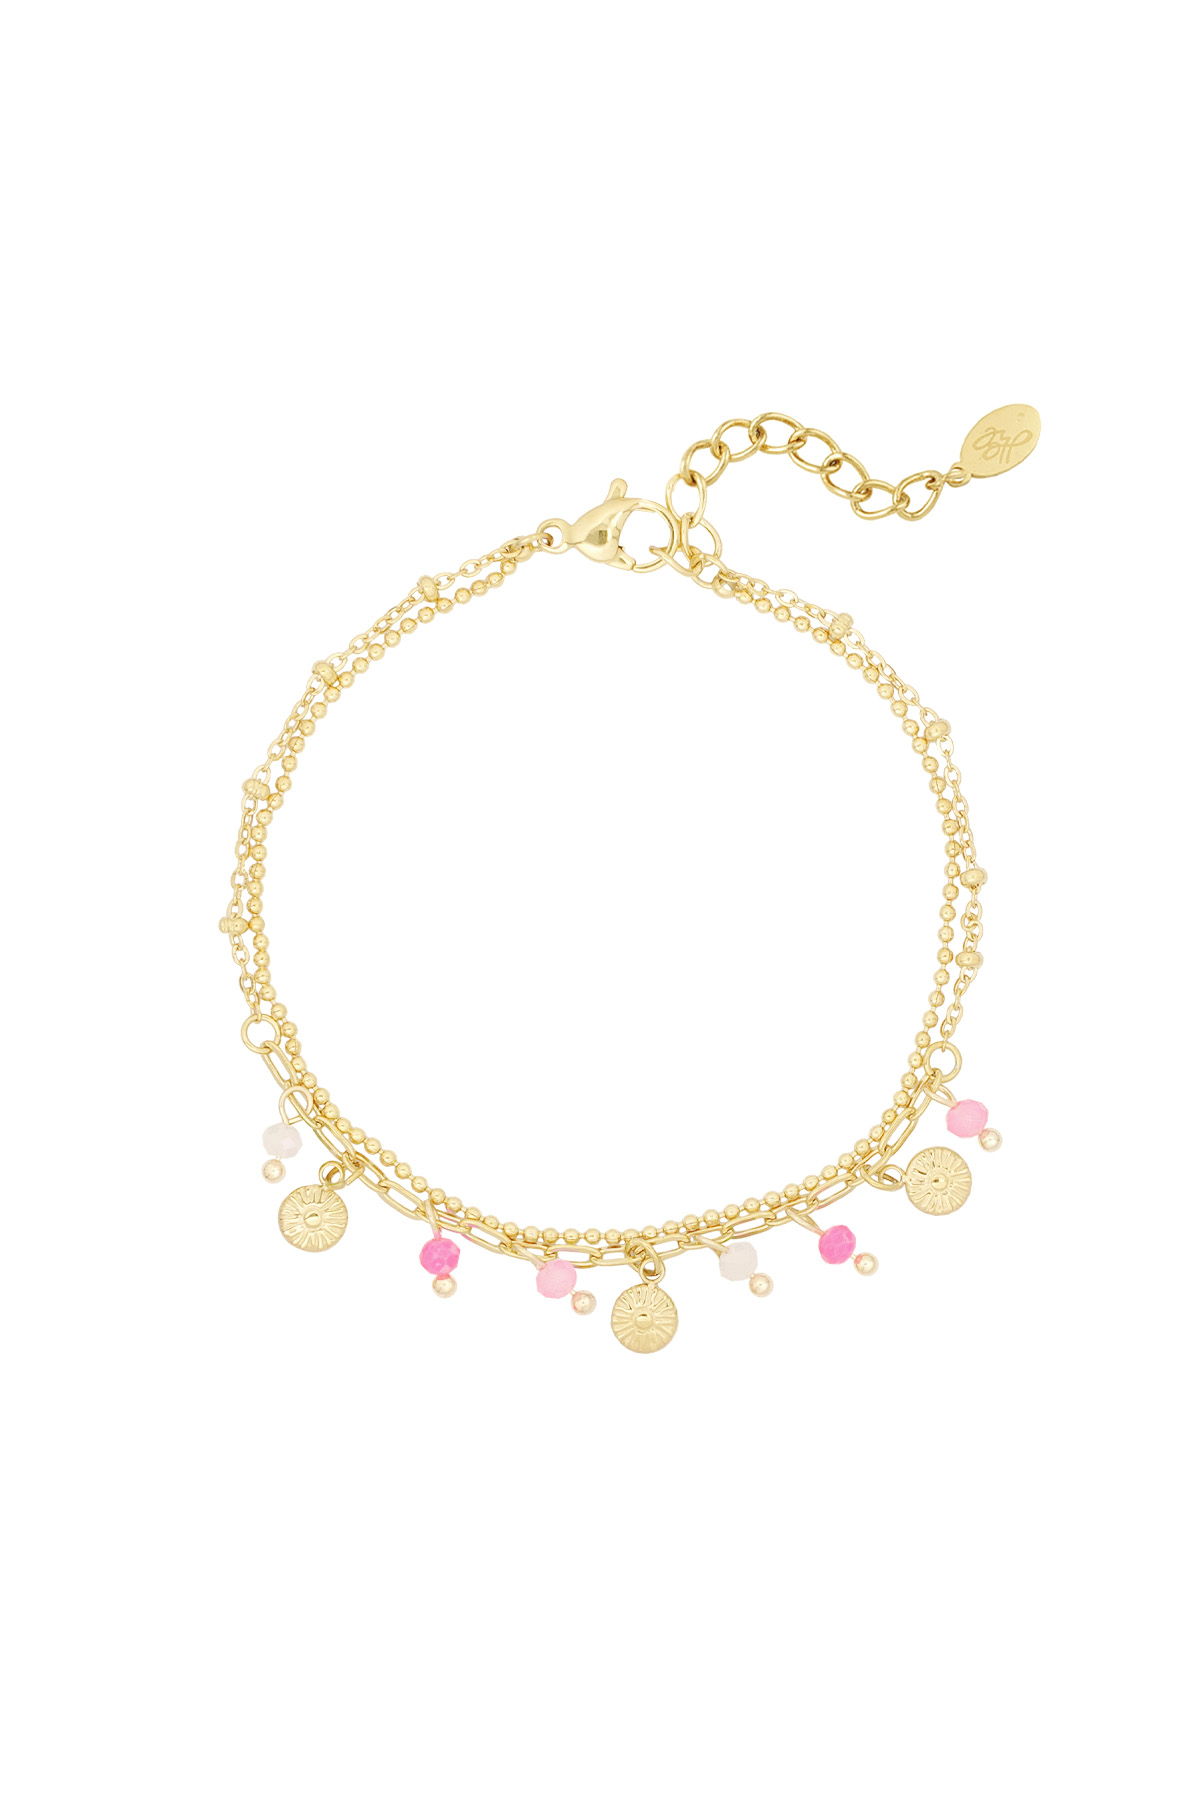 Bracelet with coins and beads - pink/gold  h5 